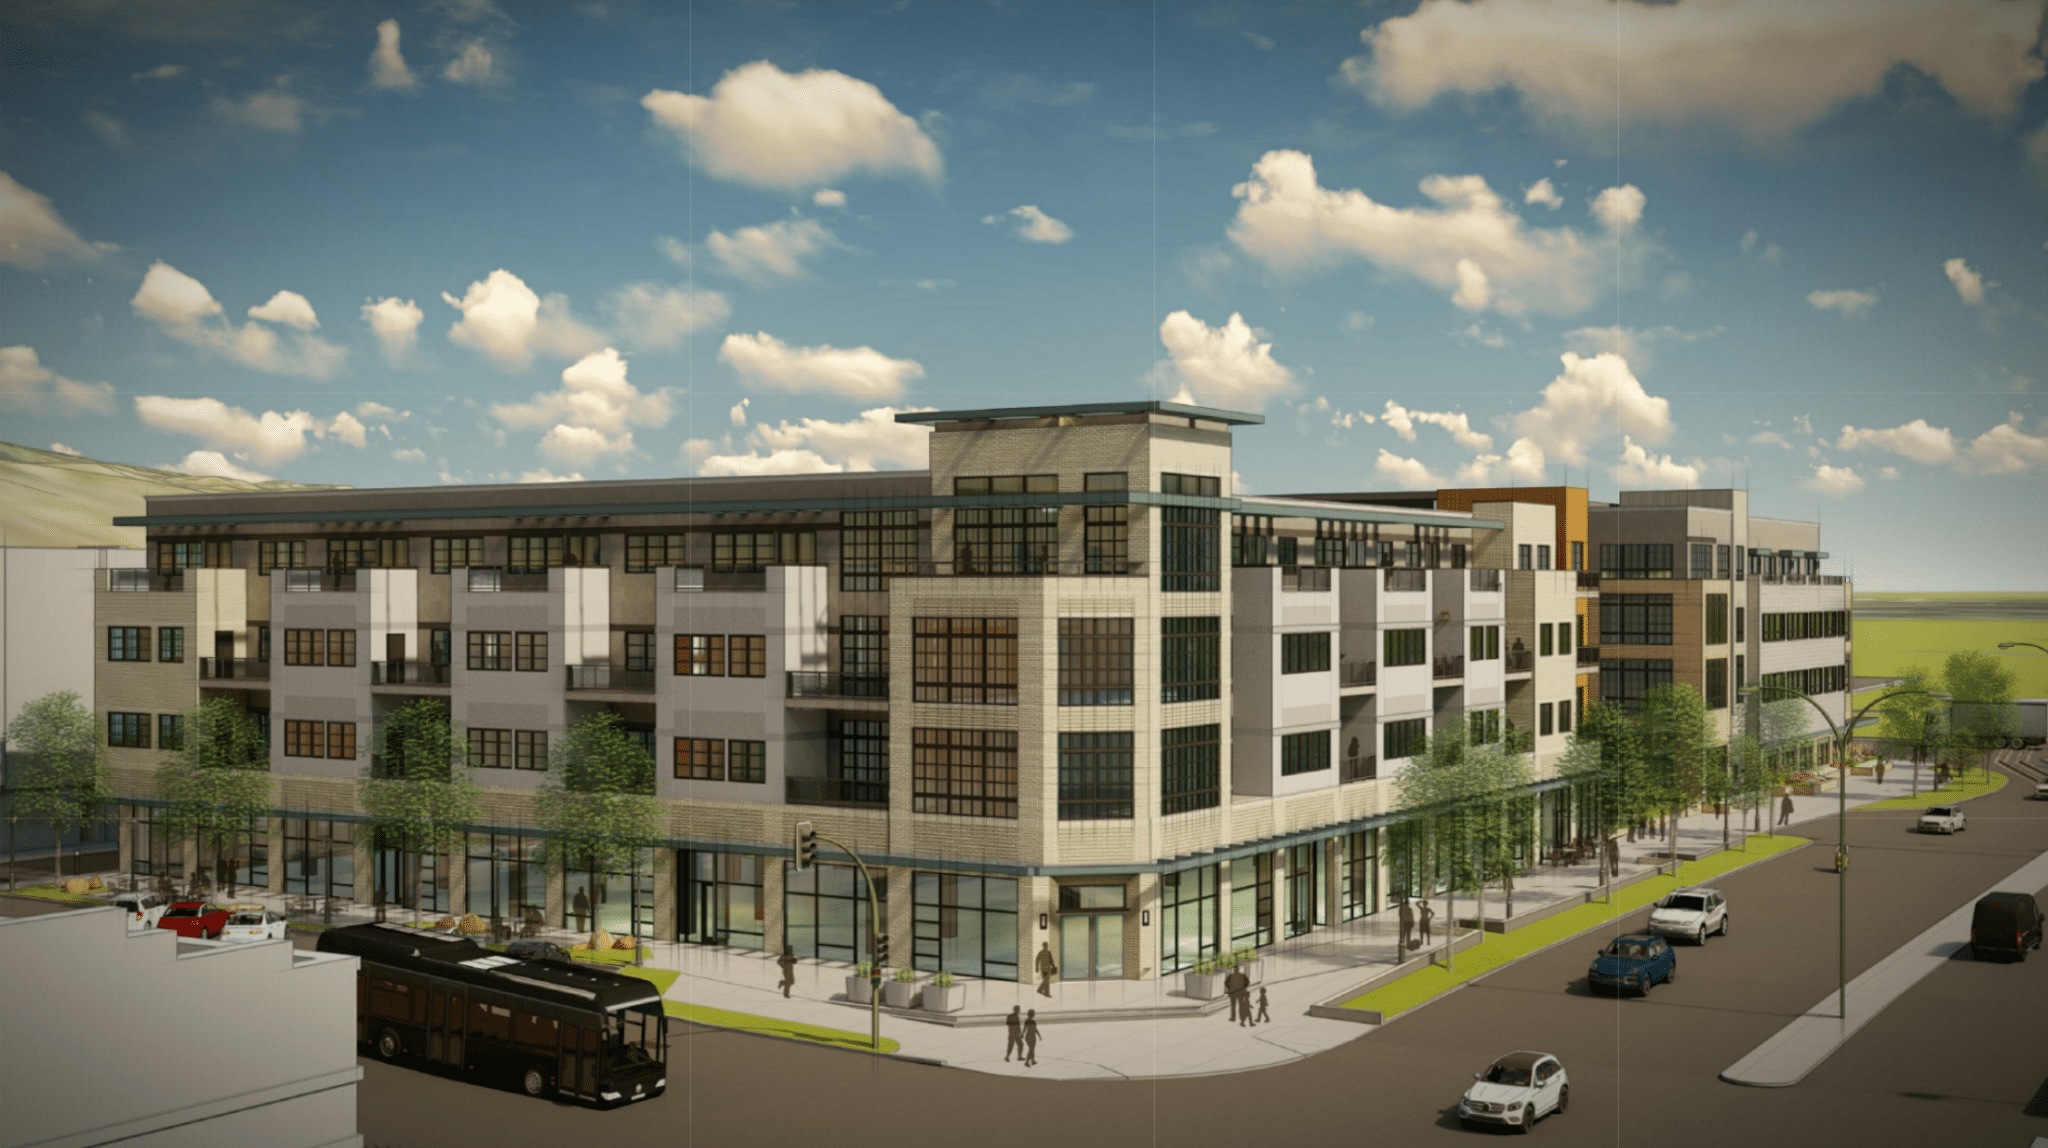 Rendering of proposed Block 23 development in Fort Collins, Colo.